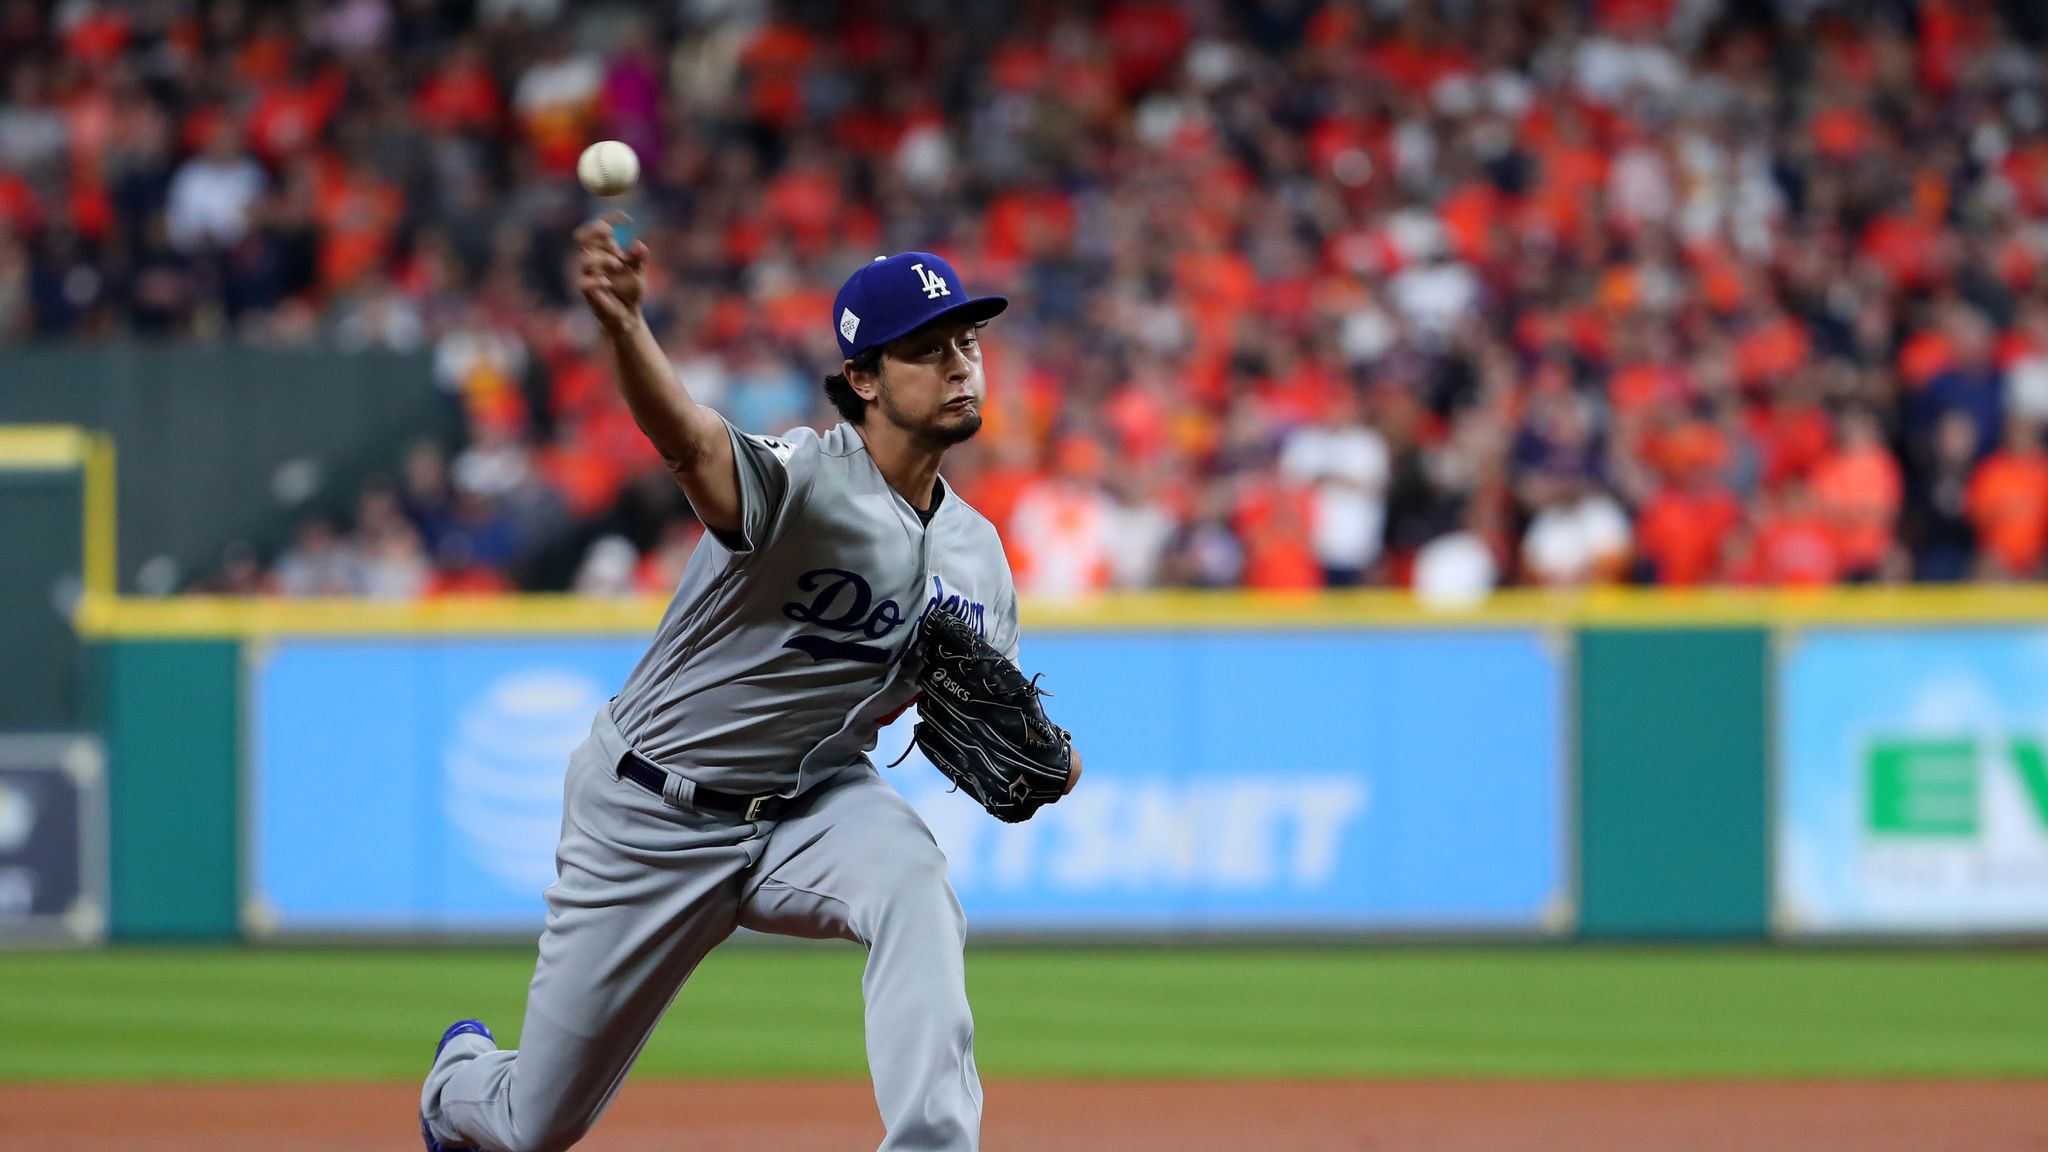 Astros pitcher may be punished for racial gesture at Yu Darvish